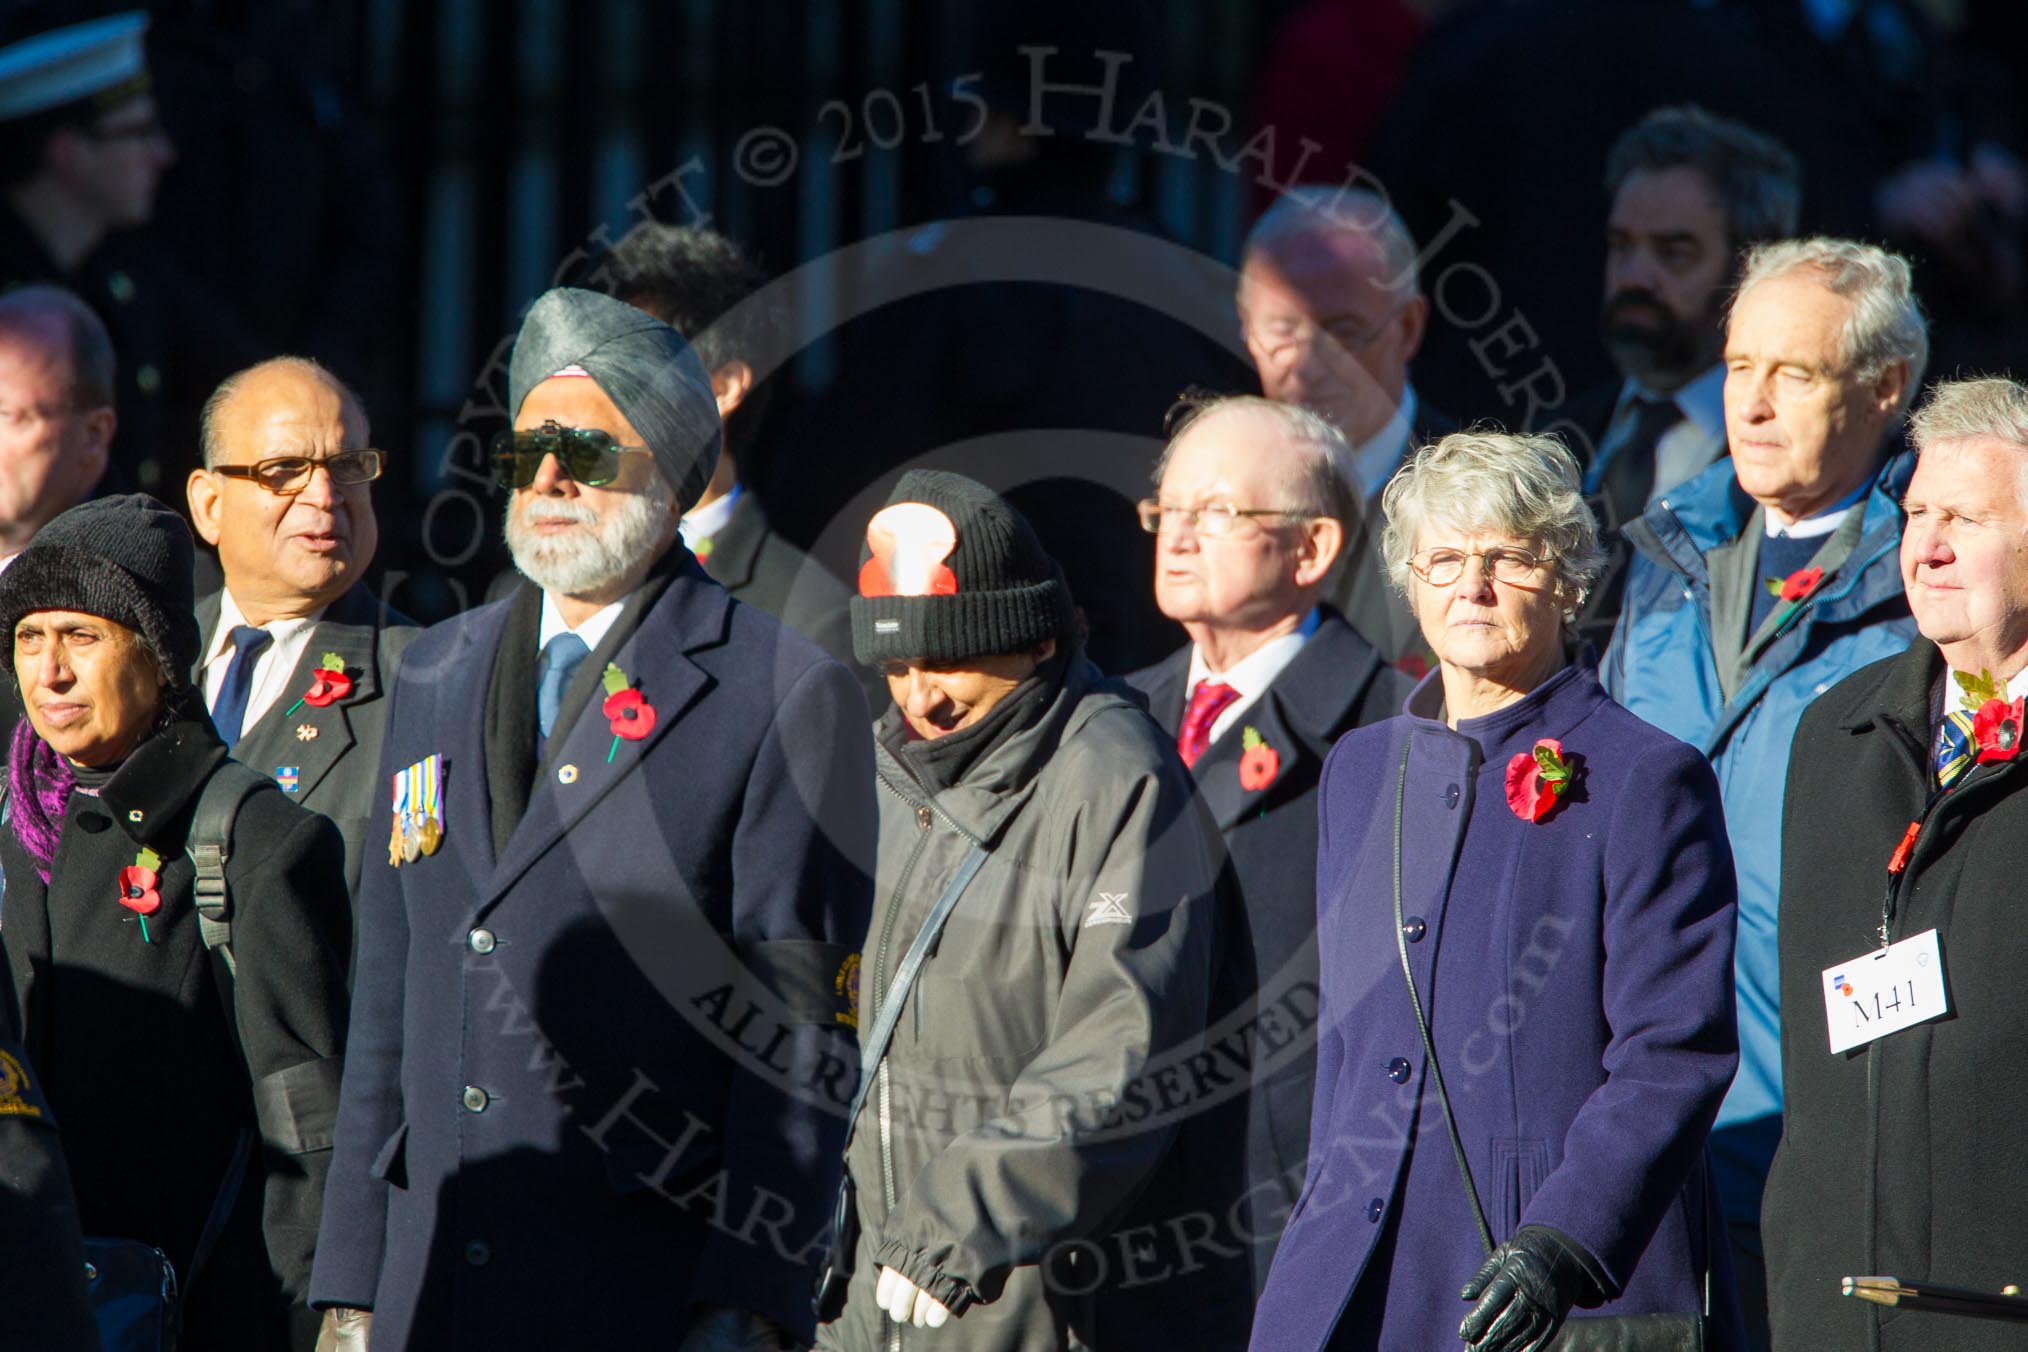 Remembrance Sunday Cenotaph March Past 2013: M40 - Lions Club International..
Press stand opposite the Foreign Office building, Whitehall, London SW1,
London,
Greater London,
United Kingdom,
on 10 November 2013 at 12:14, image #2191